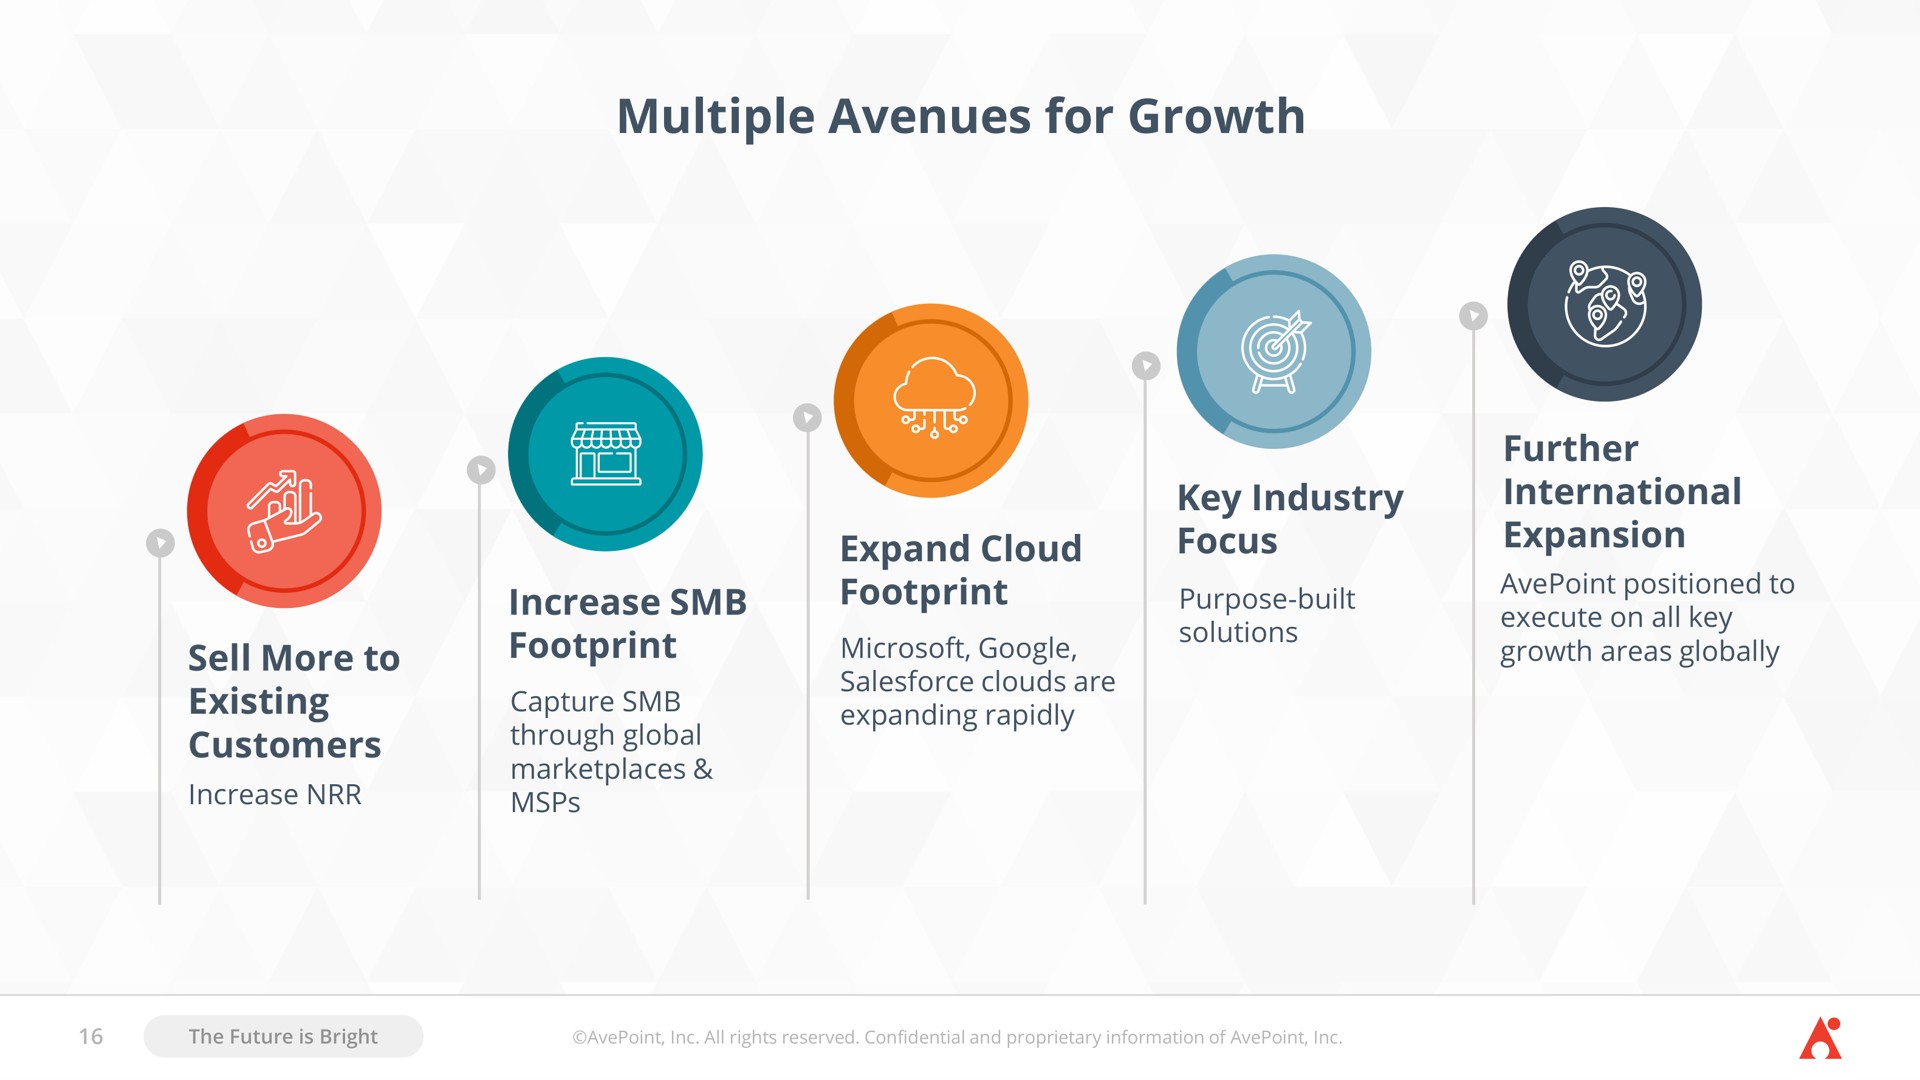 multiple avenues for growth sell more to existing customers increase footprint expand cloud footprint key industry focus further international expansion a purpose built solutions | AvePoint